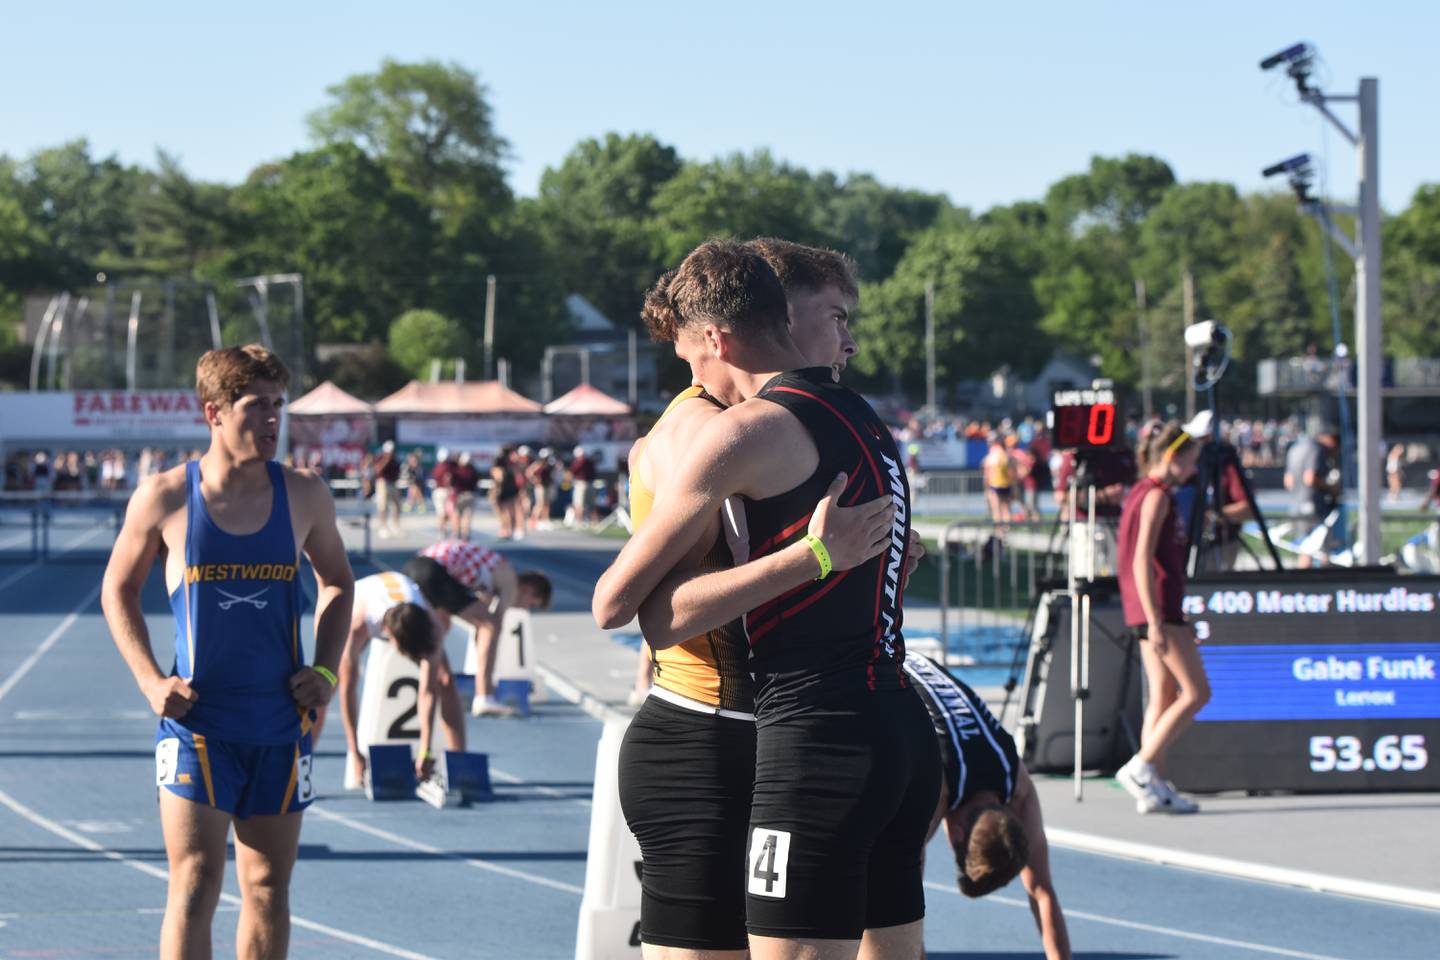 Gabe Funk and Ryce Reynolds, Pride of Iowa friendly rivals hug after placing first and second in the 400m hurdles.